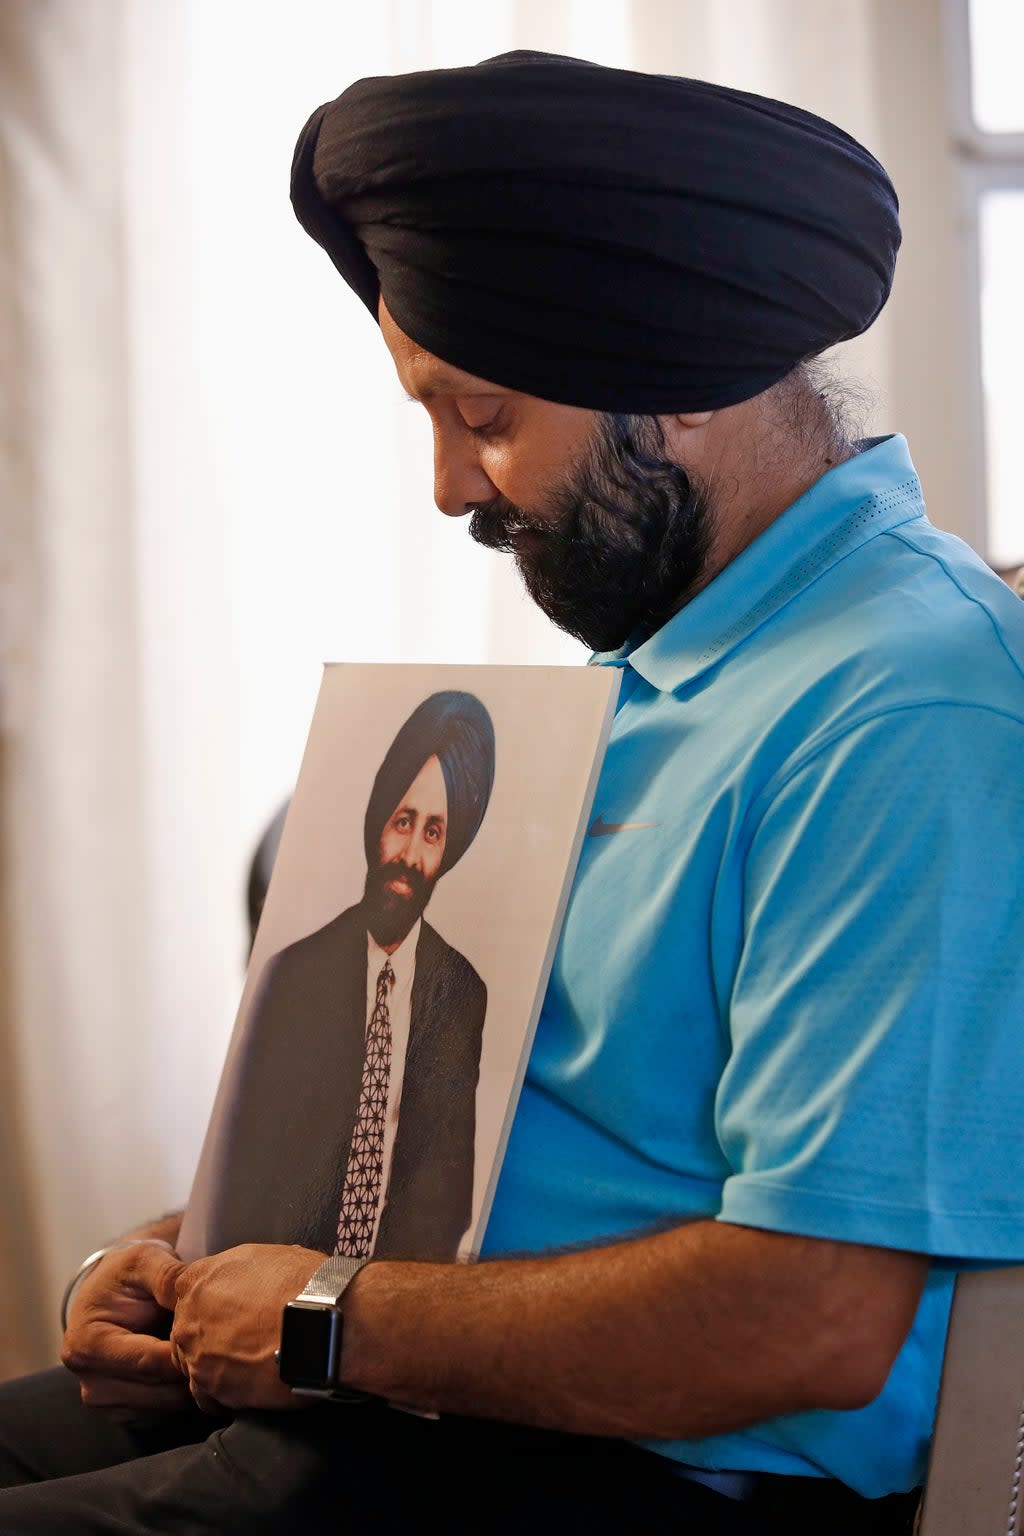 Sept 11 Growing Up Sikh In America (Copyright 2016 The Associated Press. All rights reserved.)